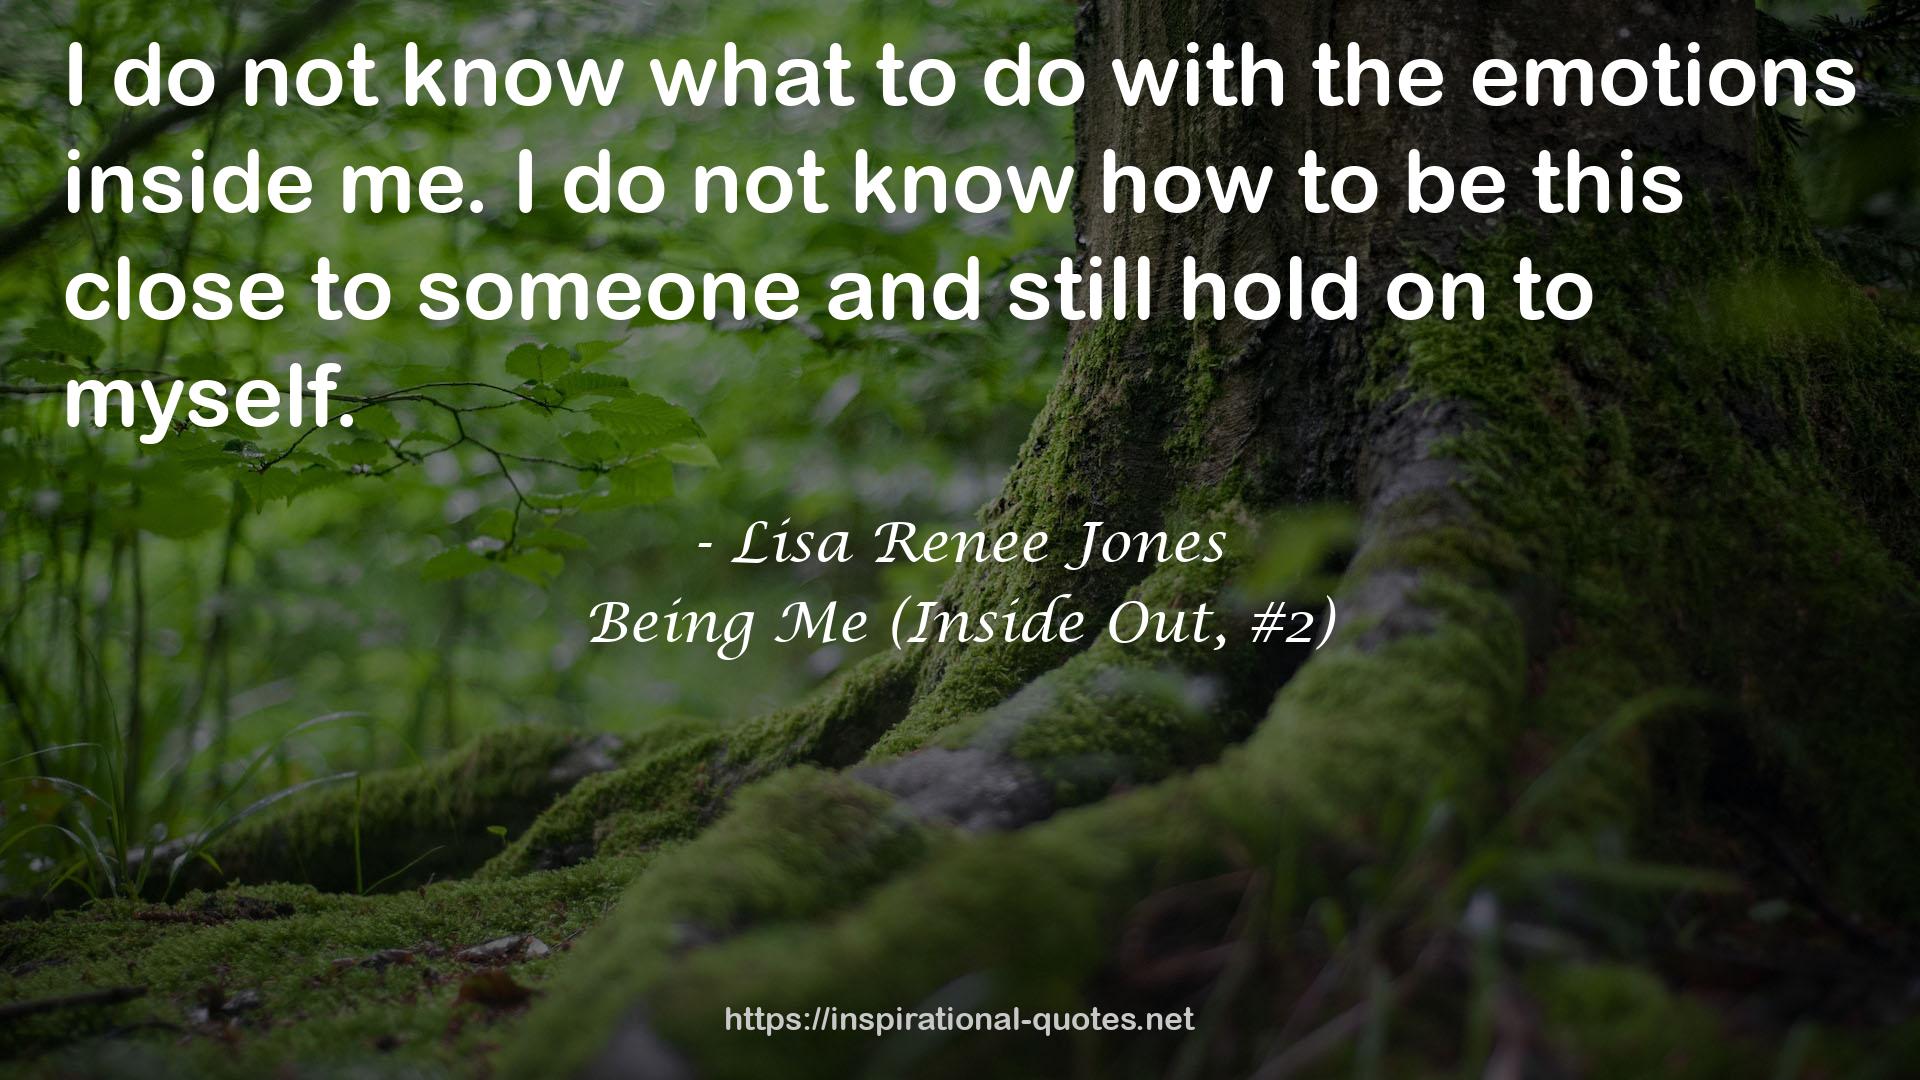 Being Me (Inside Out, #2) QUOTES